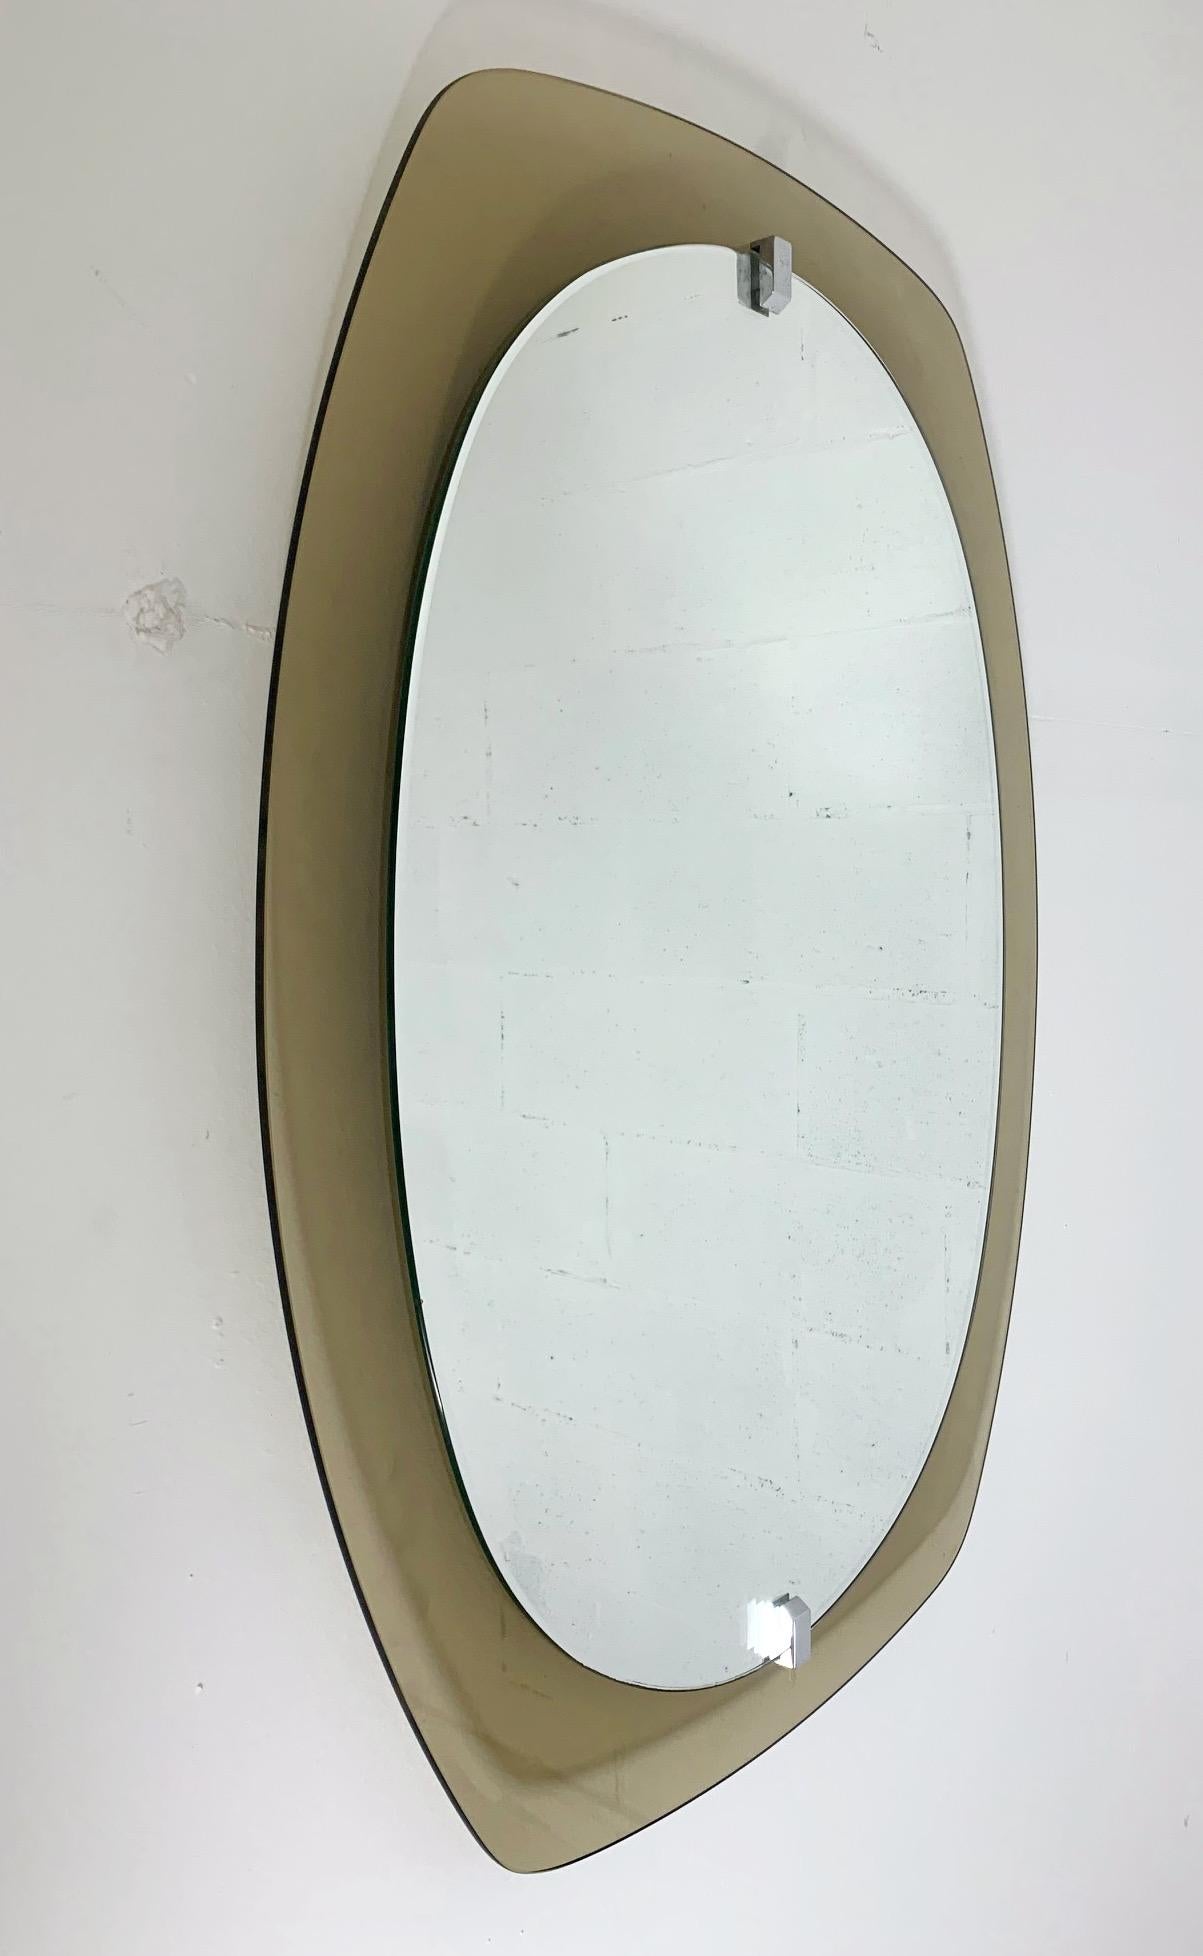 Vintage Italian oval mirror with smoky brown beveled glass by Veca / Made in Italy, circa 1960s
Original sticker on the back
Measures: Height 31.5 inches, width 23.5 inches, depth 2 inches
1 in stock in Italy ON 50% OFF SALE for $1,249 !!!
Order